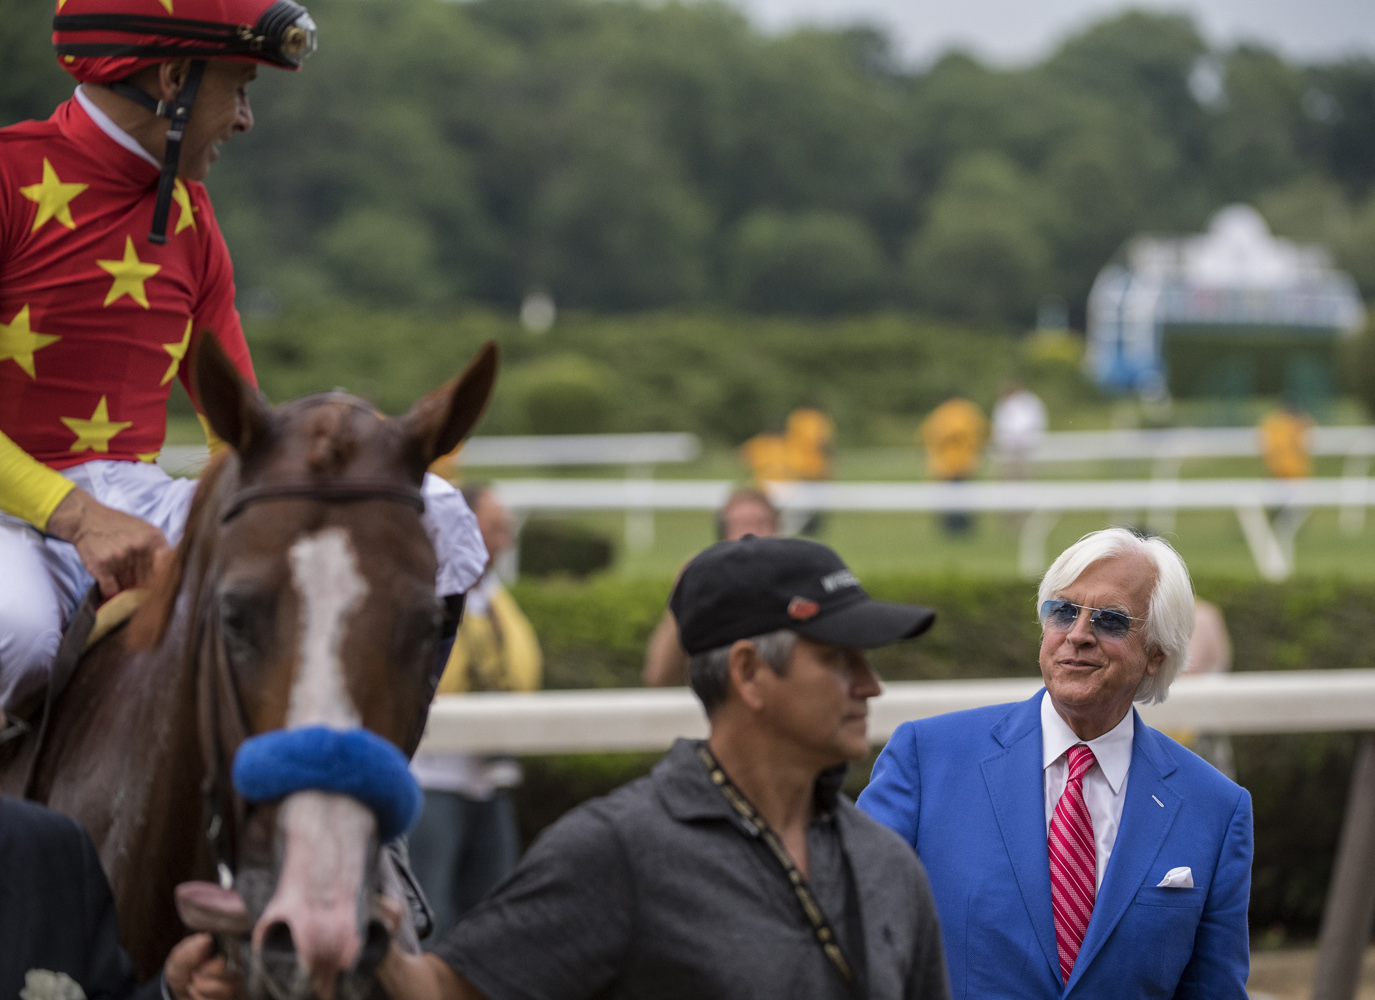 Bob Baffert and Mike Smith share a moment after Justify's Belmont Stakes and Triple Crown victory in 2018 (Skip Dickstein)